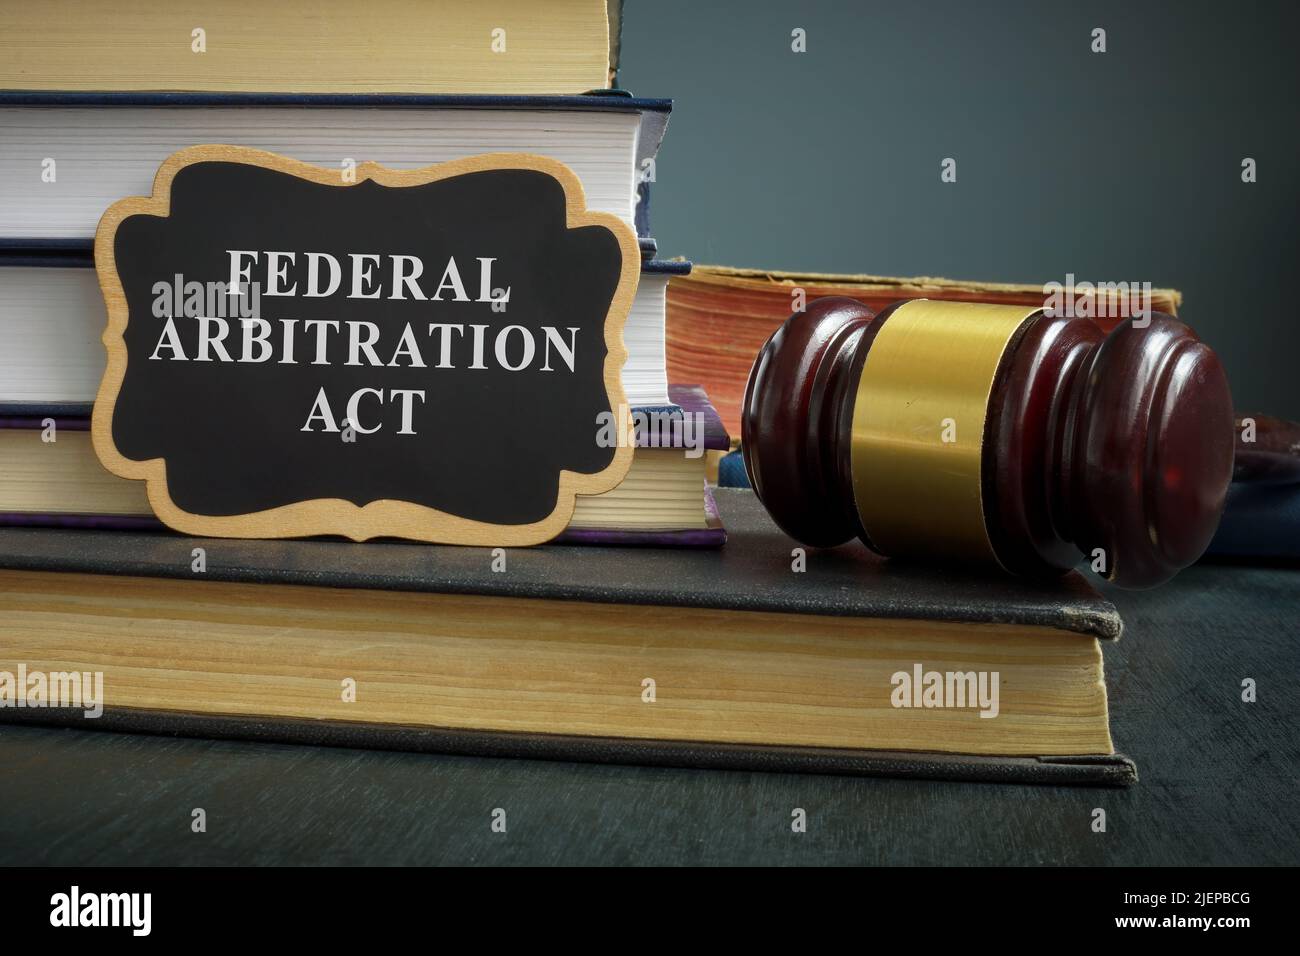 Pile of books and gavel. Federal arbitration act concept. Stock Photo